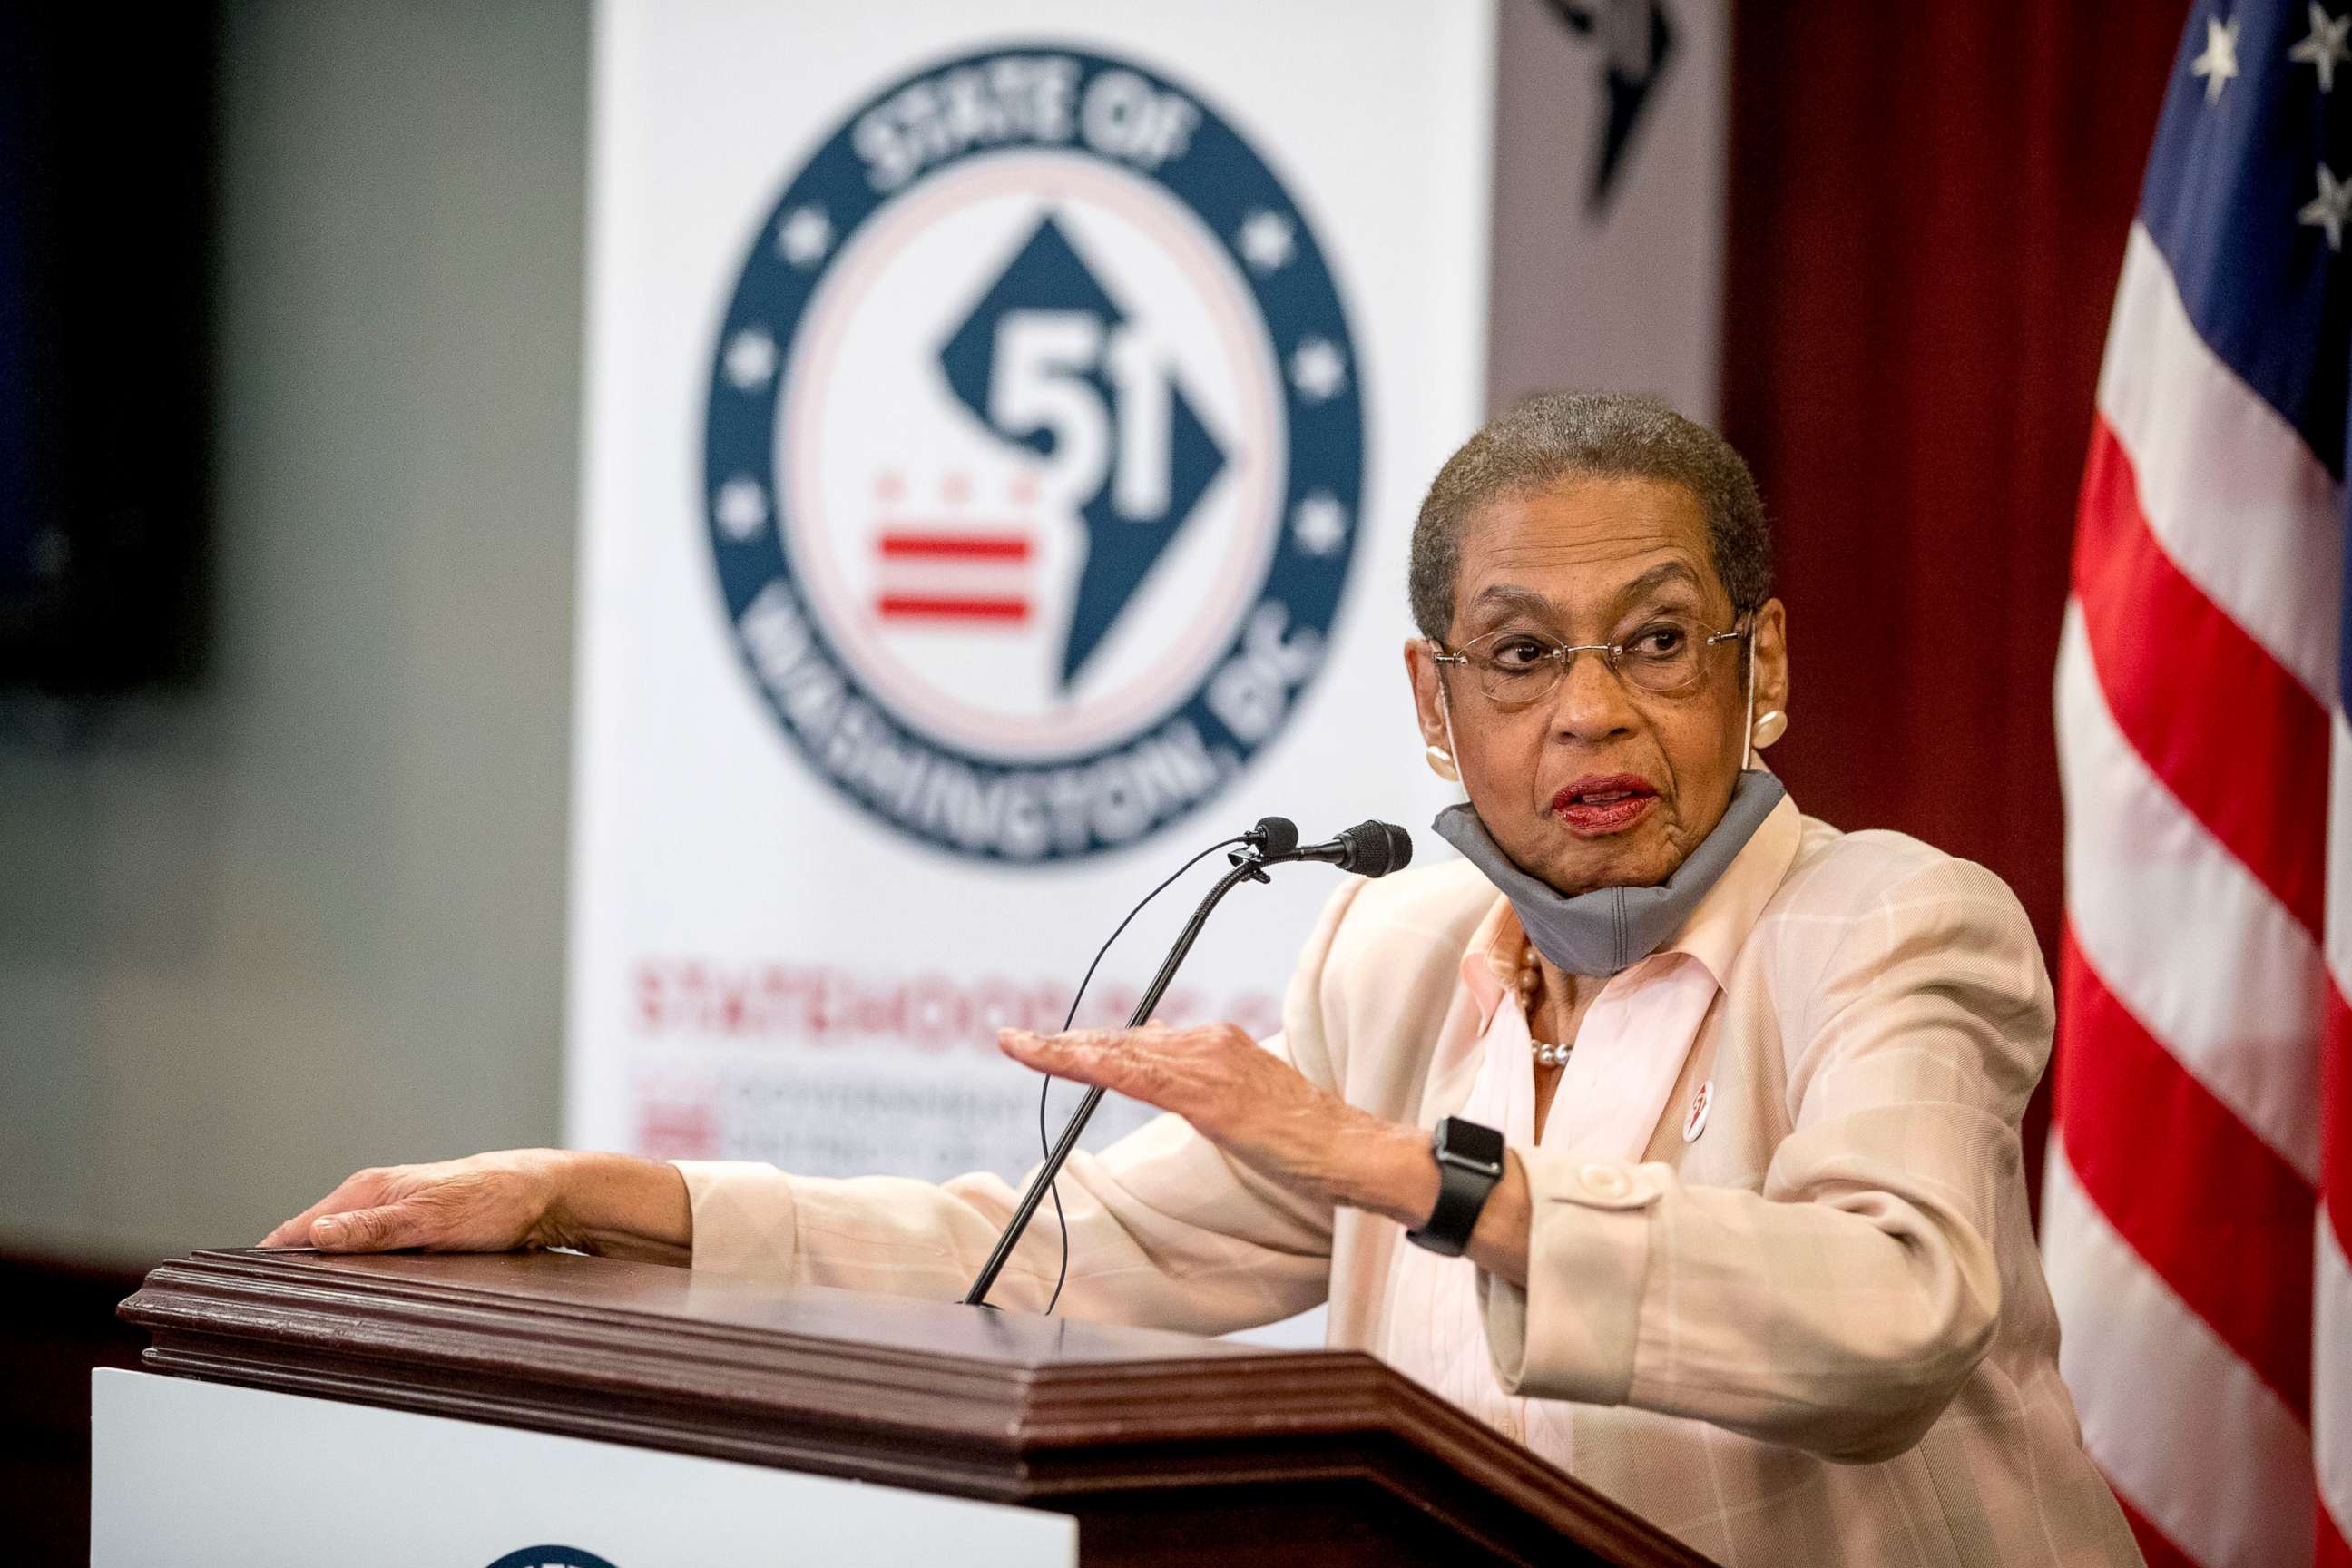 PHOTO: Delegate Eleanor Holmes Norton, D-D.C., speaks at a news conference on District of Columbia statehood on Capitol Hill, June 16, 2020.